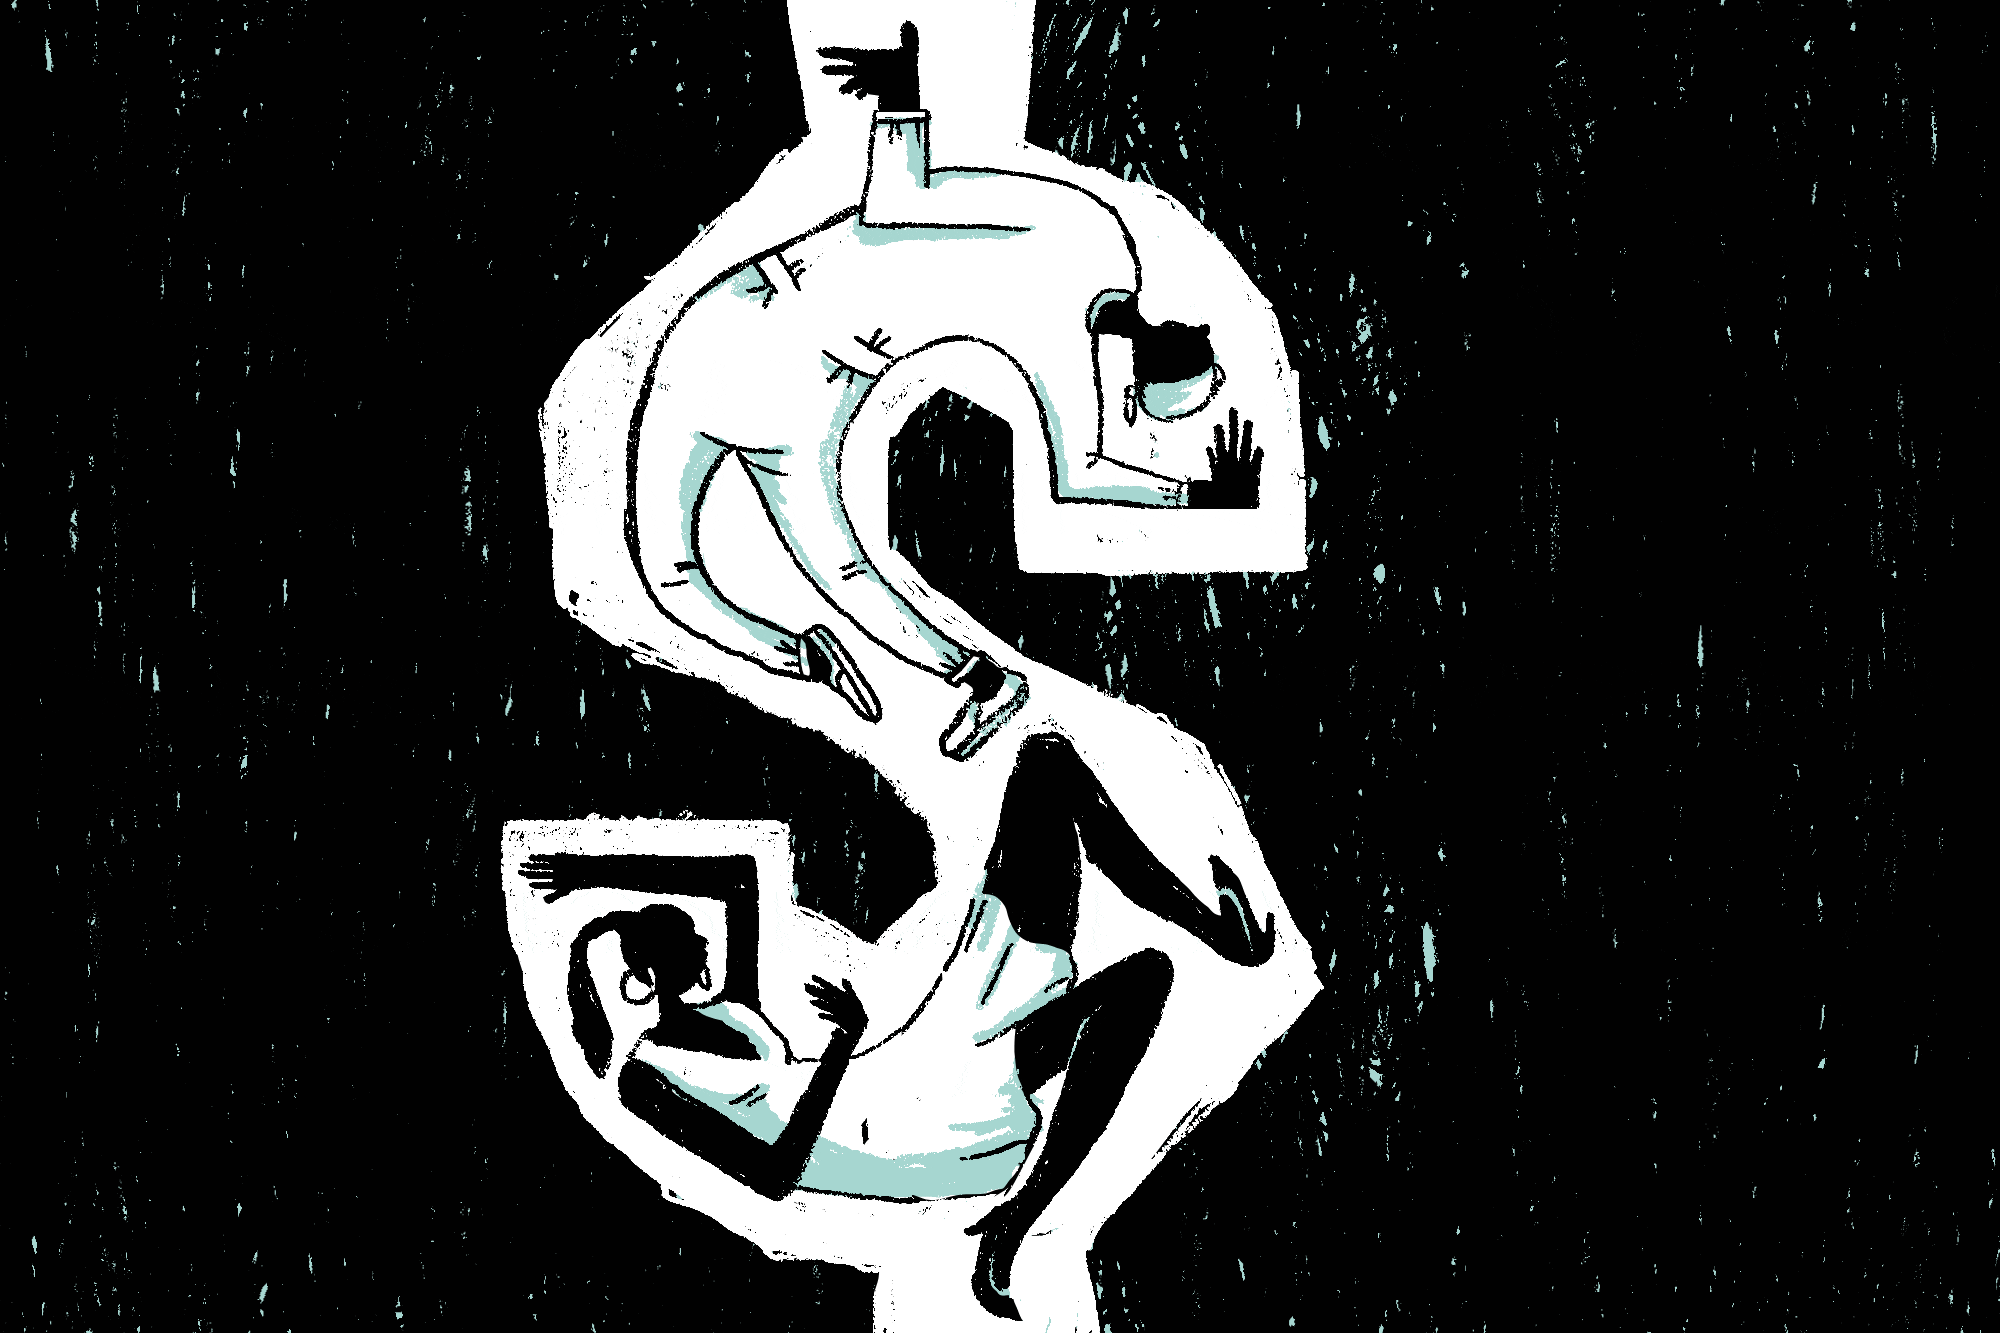 Illustration of two people tumbling inside of a dollar sign.